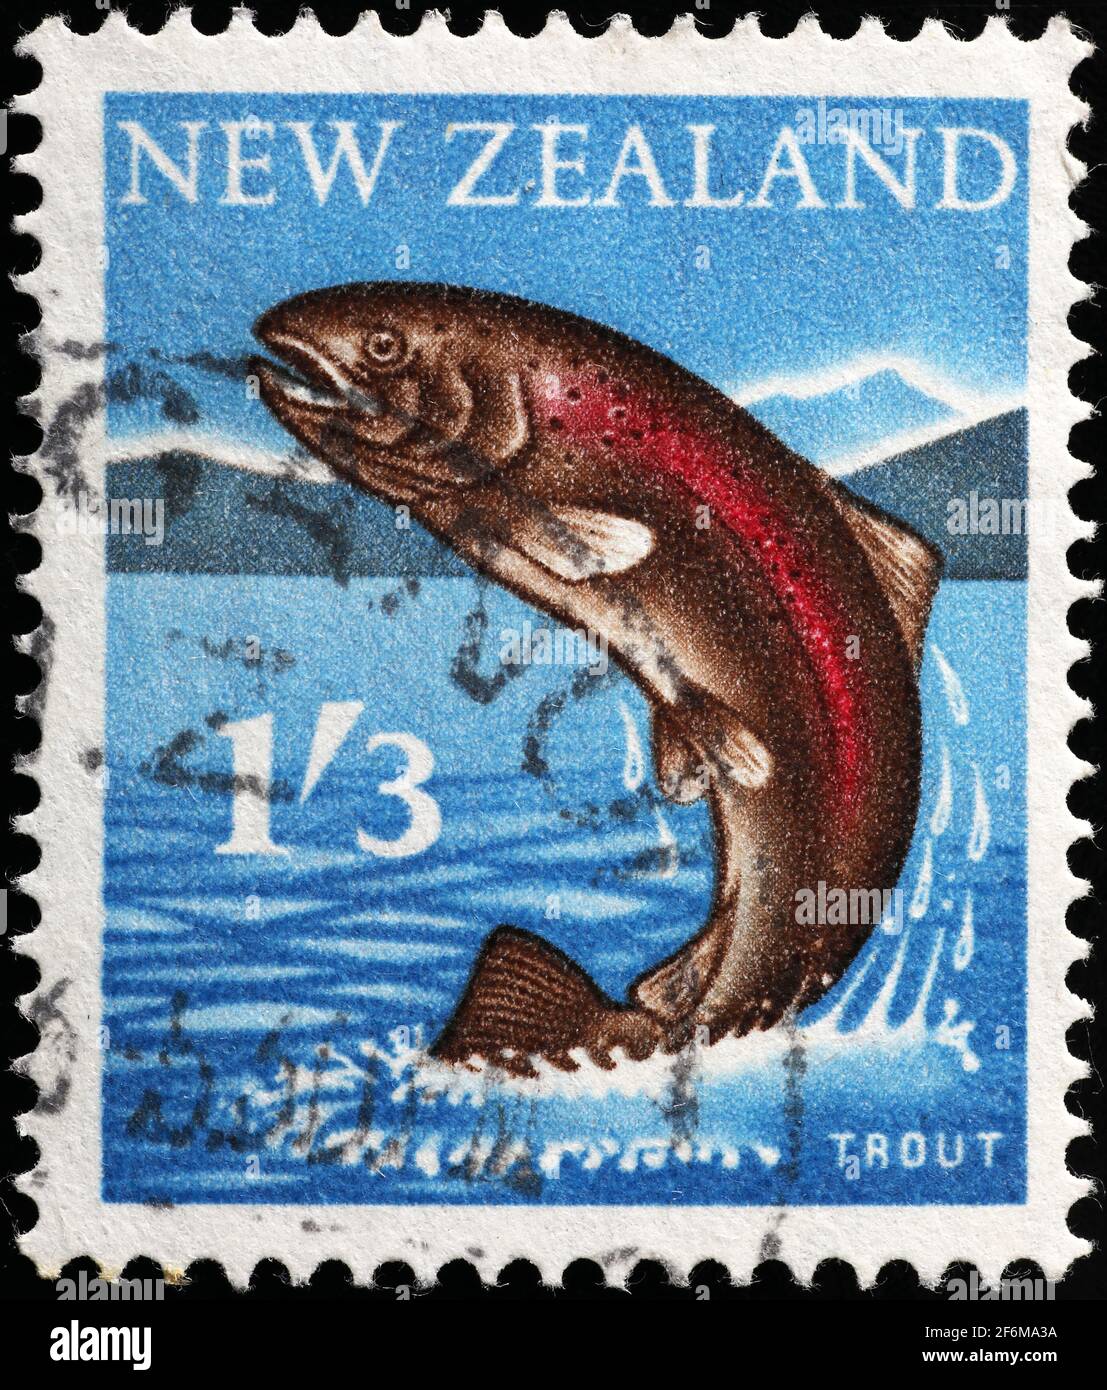 Trout on New Zealand postage stamp Stock Photo